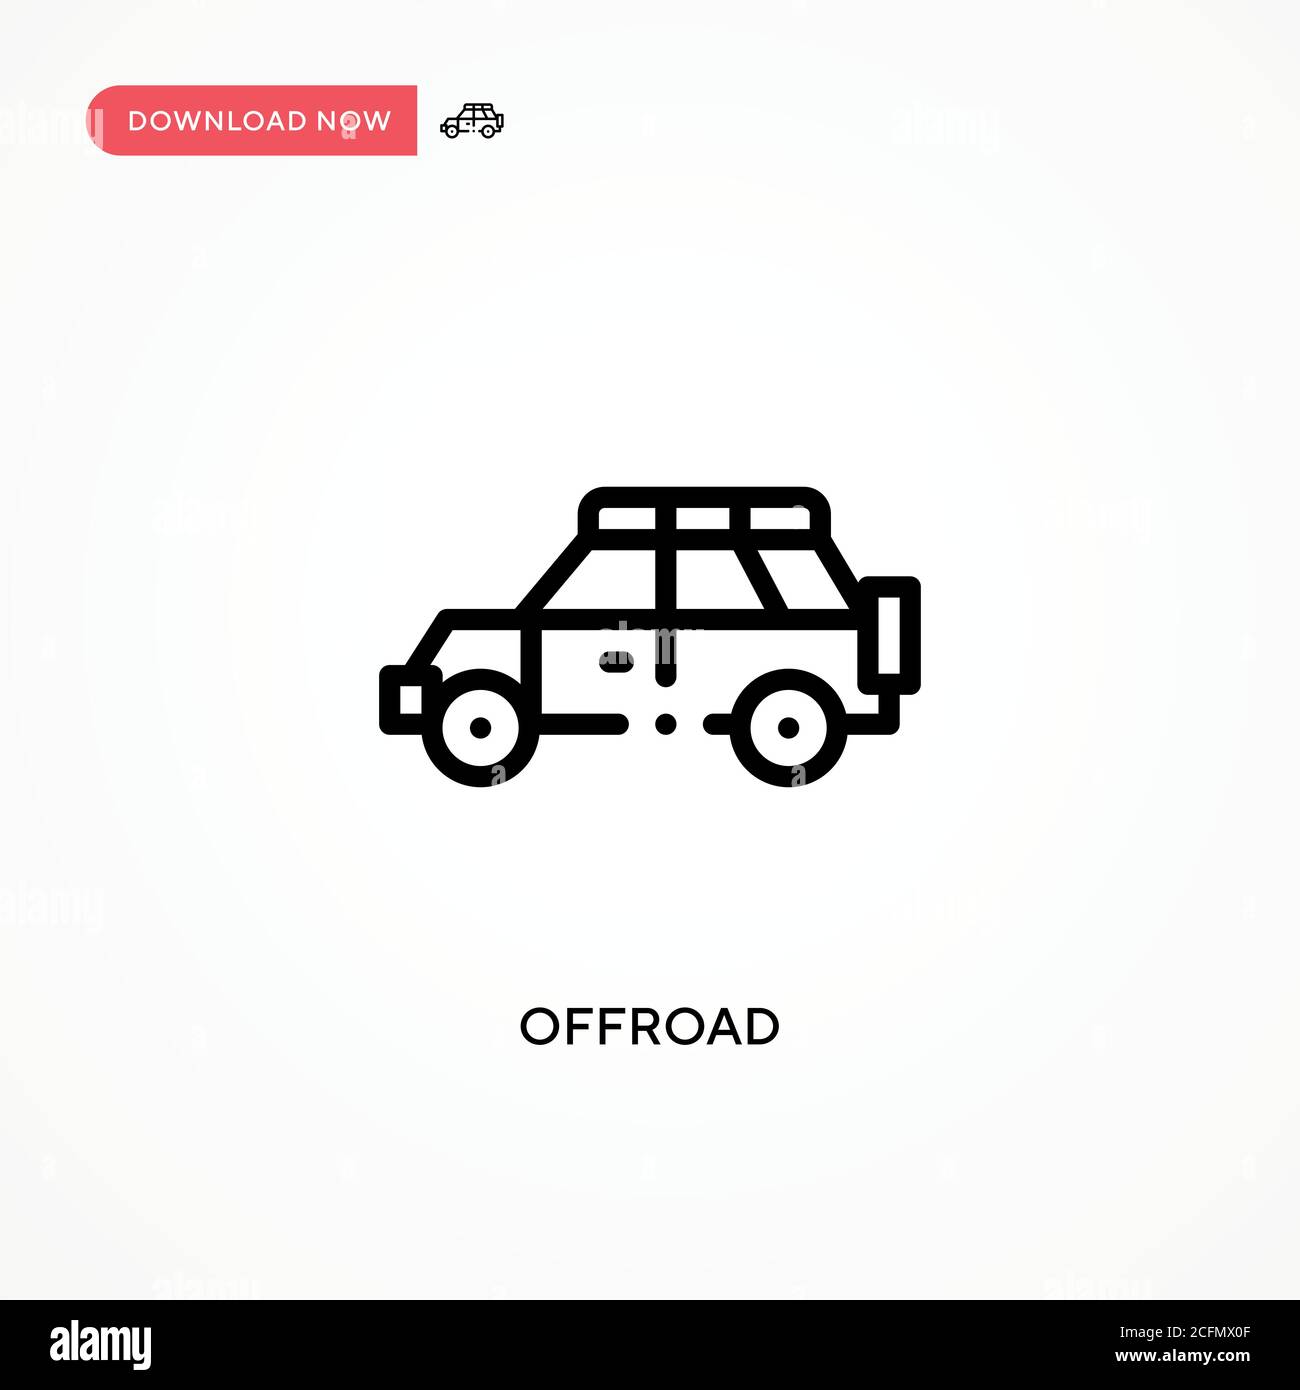 Offroad vector icon. Modern, simple flat vector illustration for web site or mobile app Stock Vector